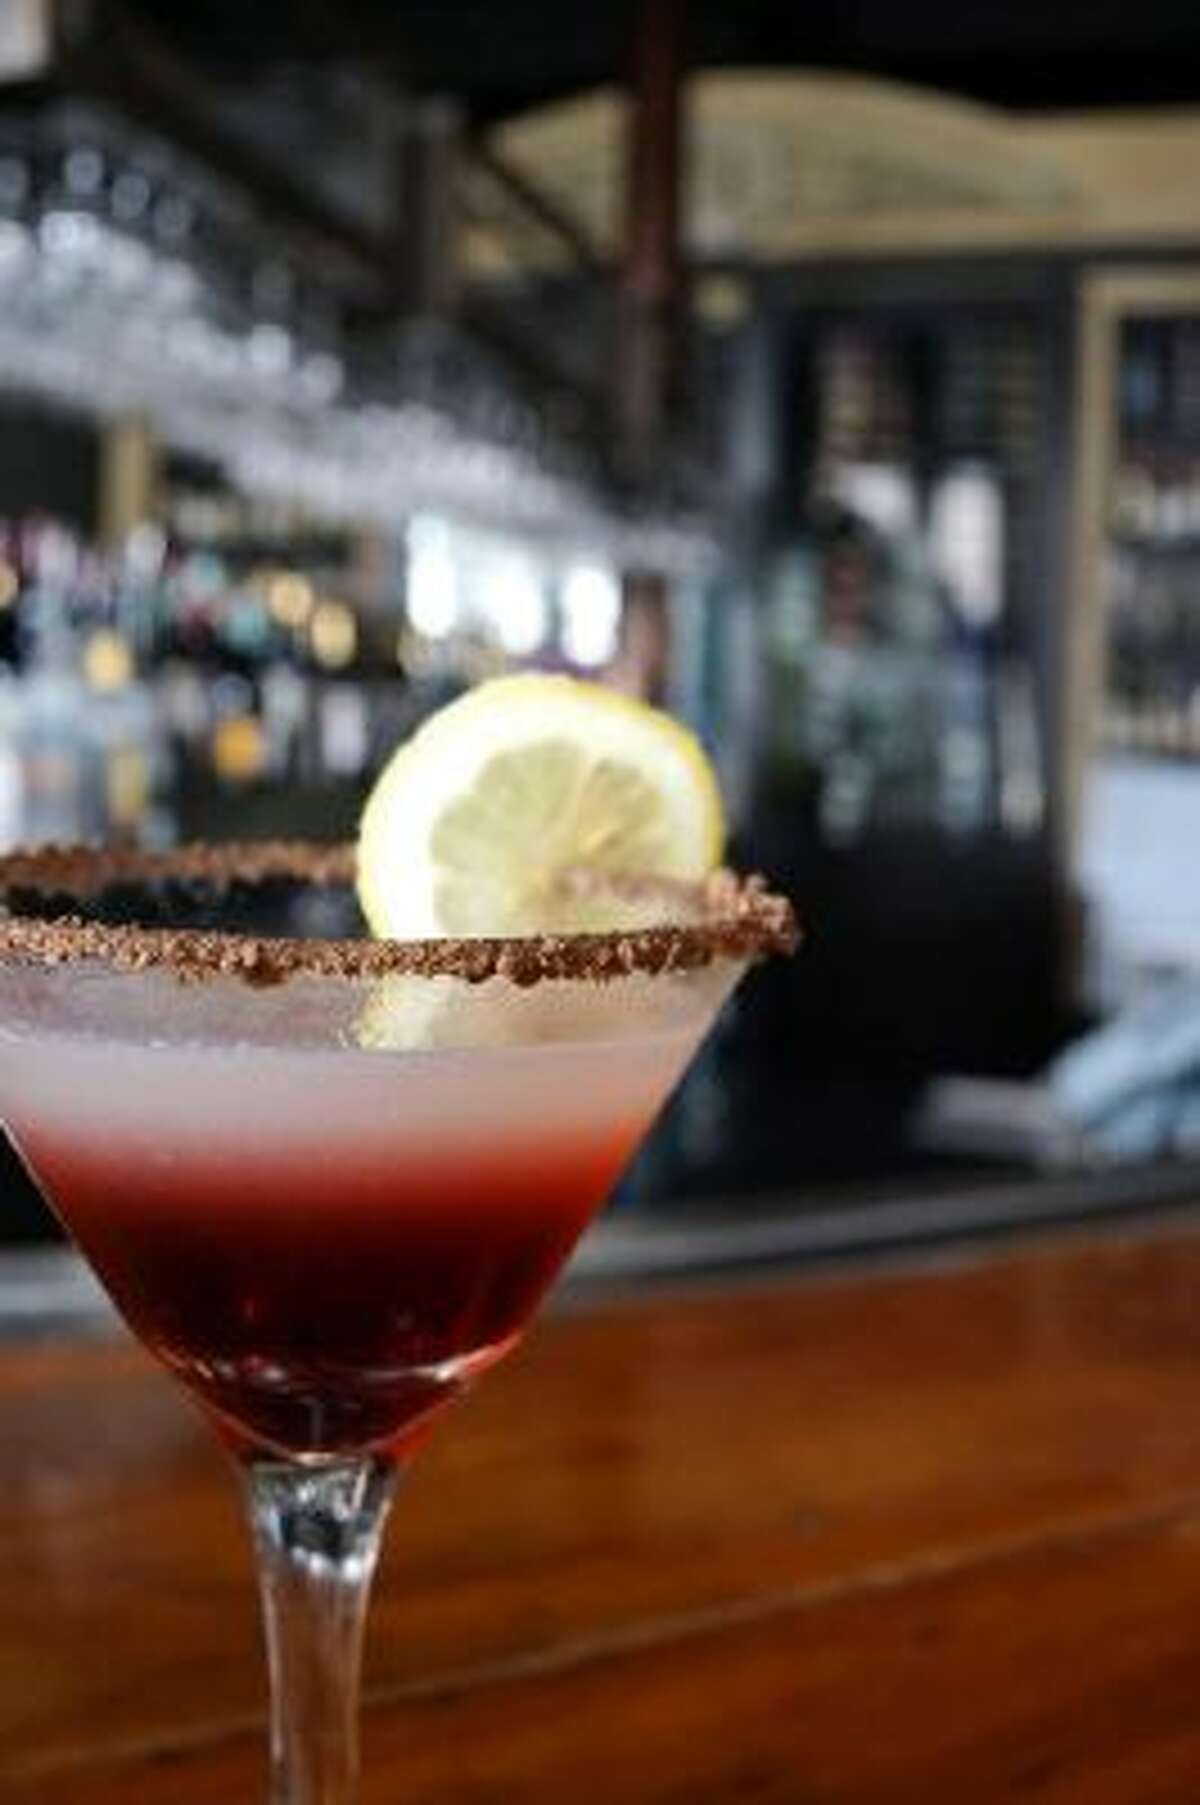 Love's Second Chance is a layered cocktail inspired by "Her," starring Joaquin Phoenix.